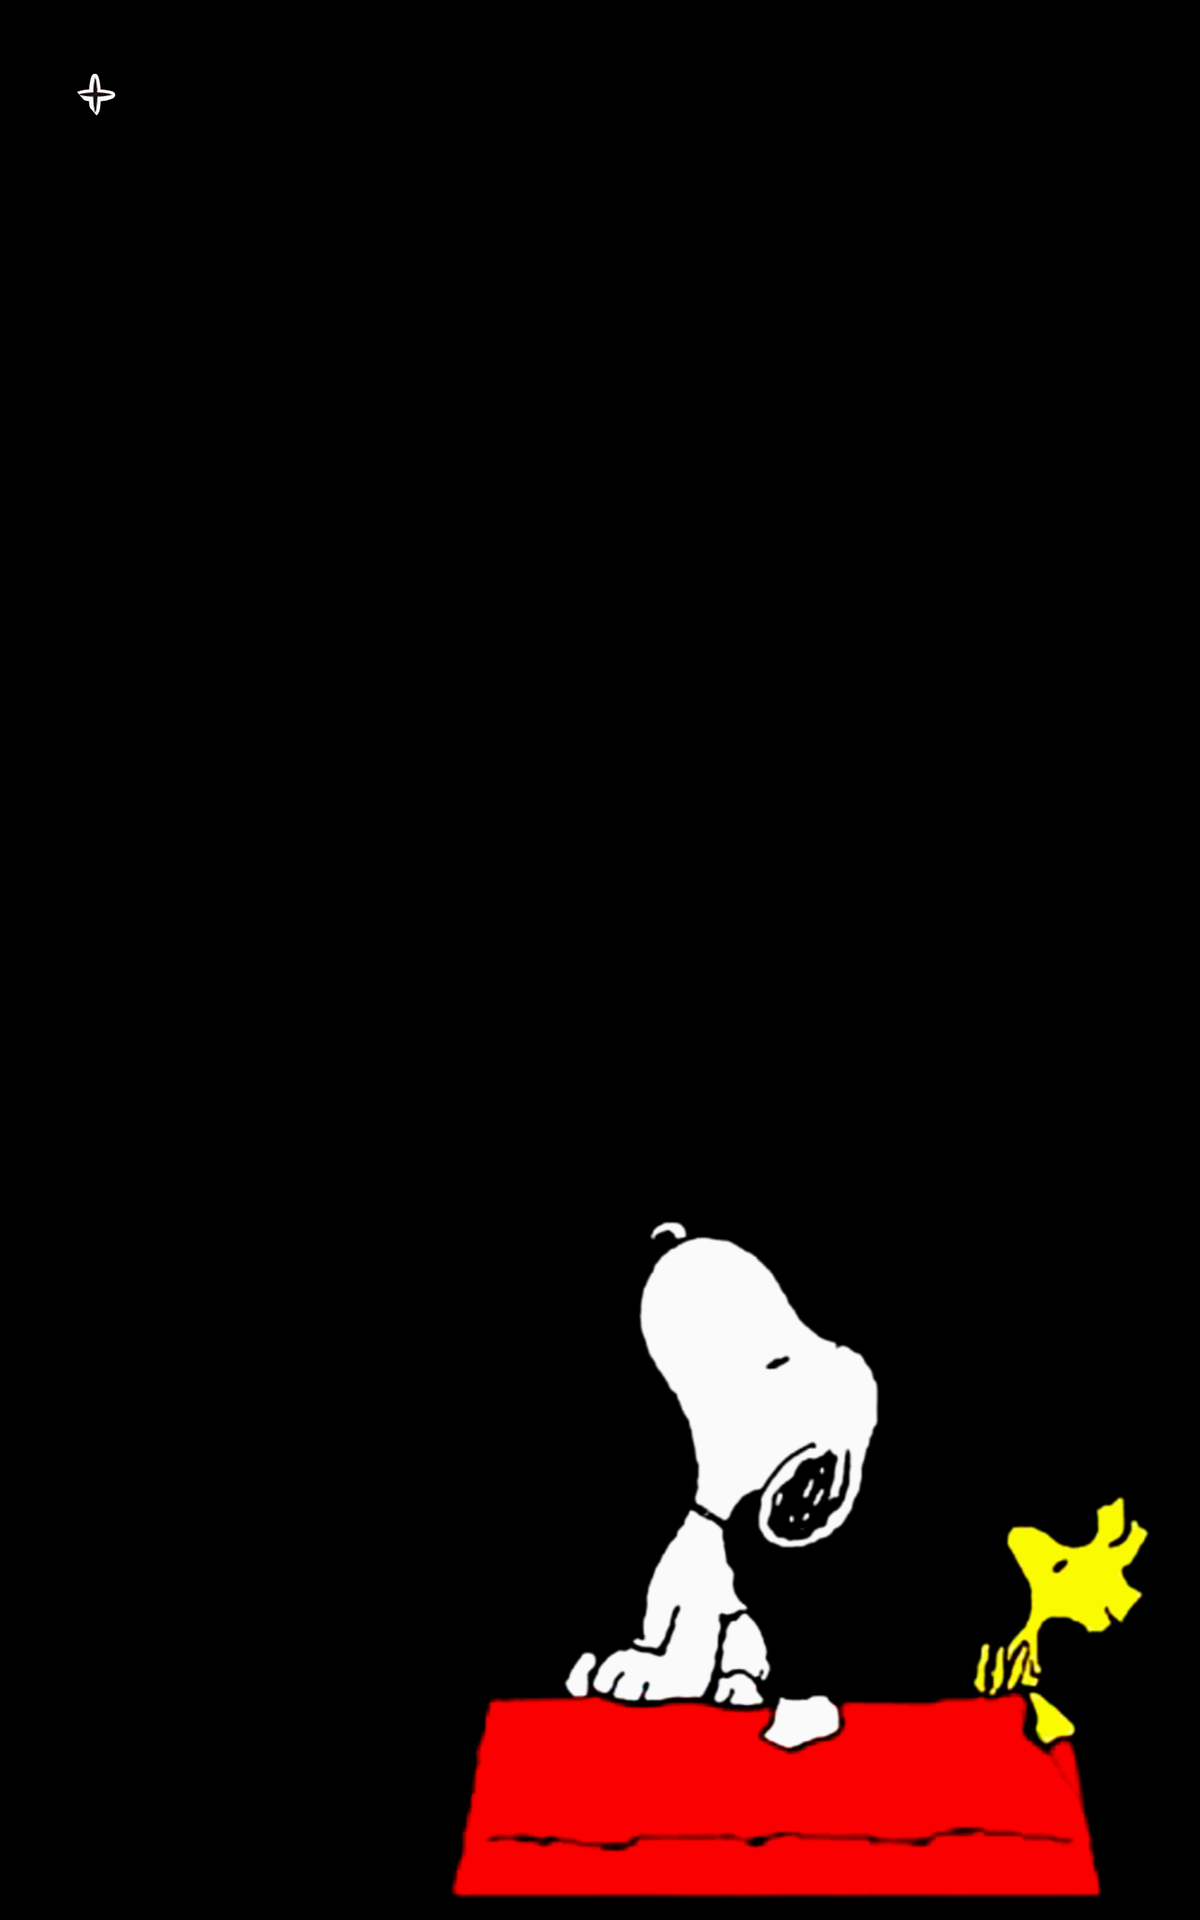 1200x1920 &eth;&#159;&#140;&#138;&eth;&#159;&#140;&#138;&eth;&#159;&#140;&#138; : Foto | Snoopy wallpaper, Snoopy wallpaper backgrounds, Snoopy pictures